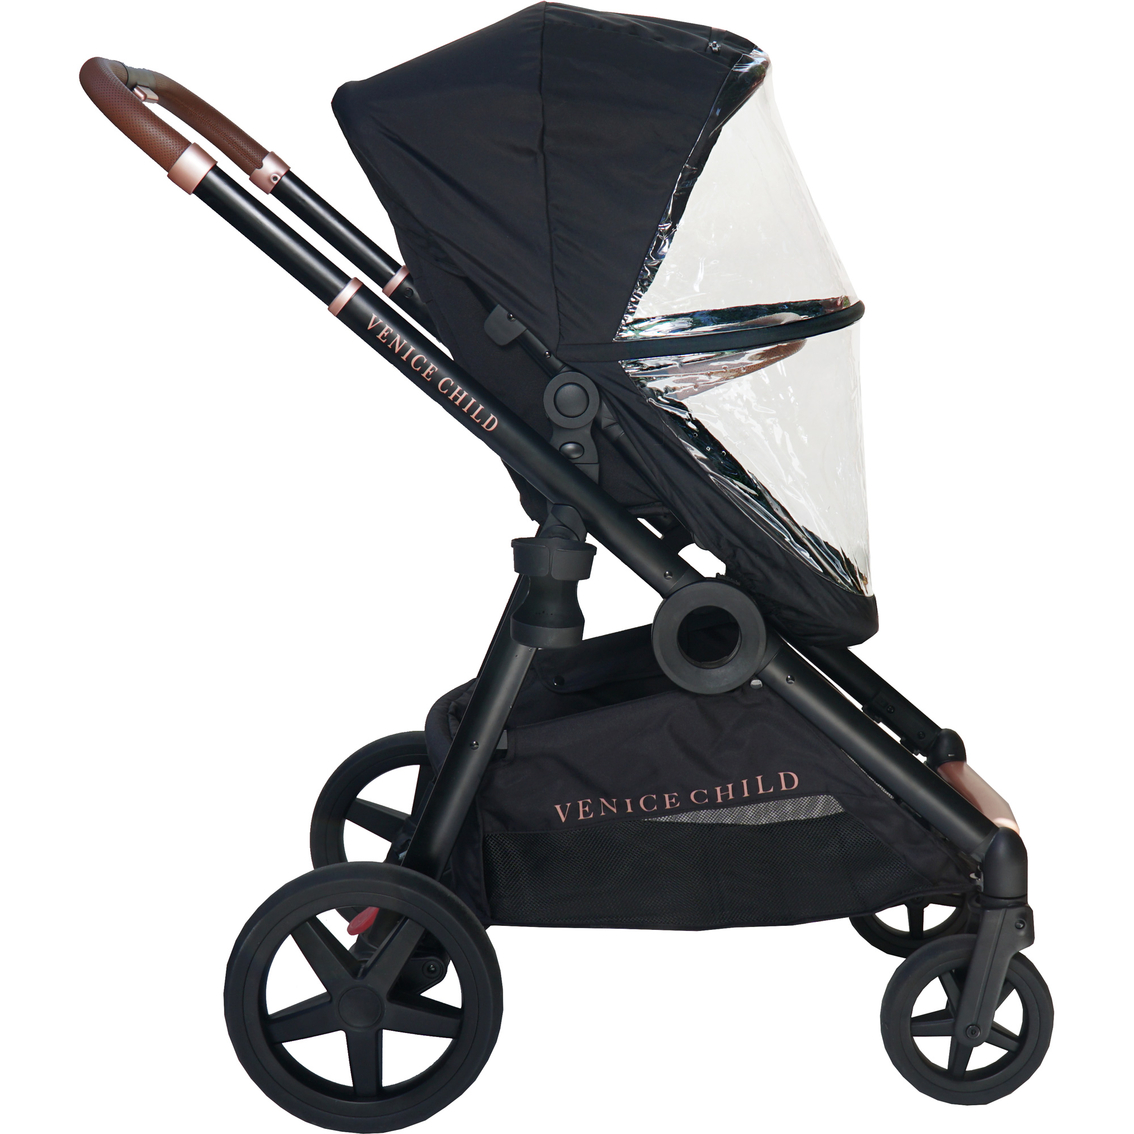 Venice Child Maverick Stroller and 2nd Toddler Seat - Image 8 of 10